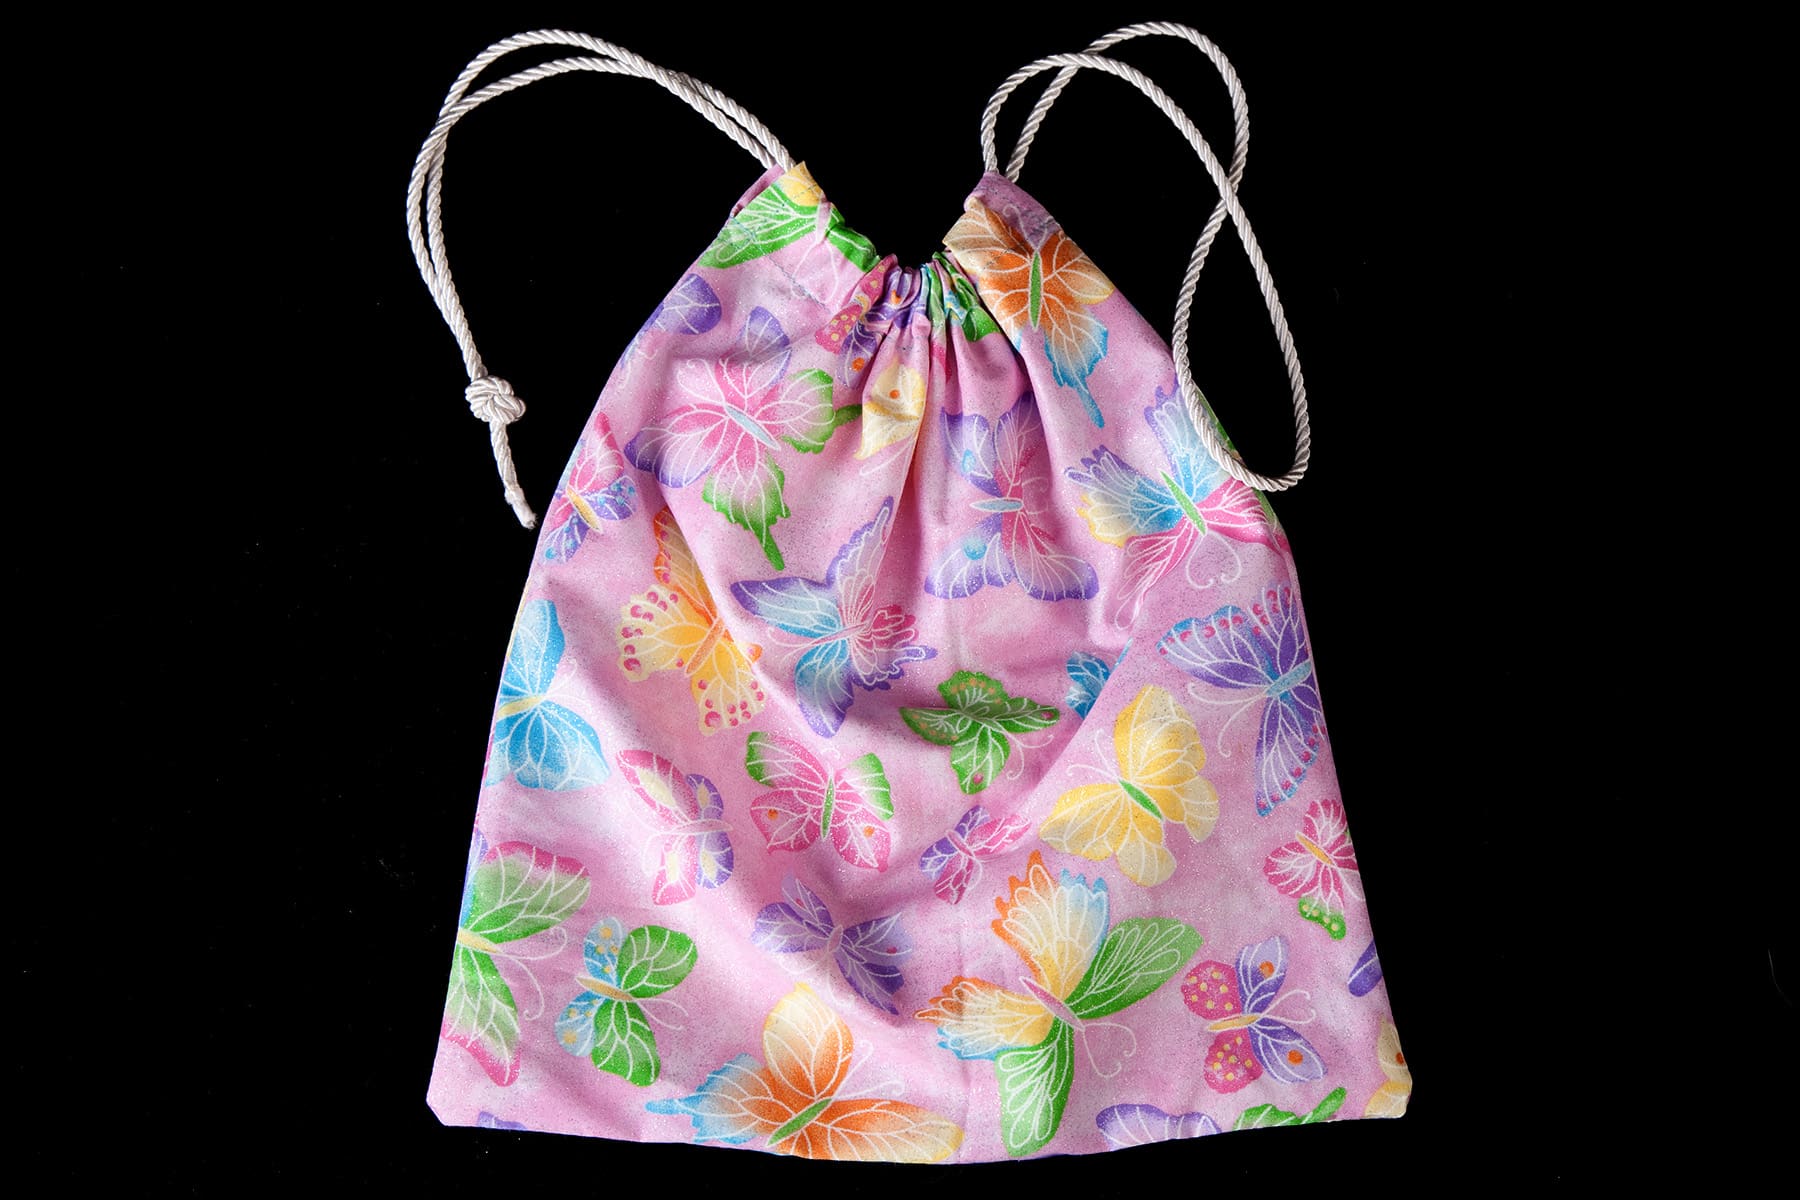 A light purple butterfly print Grip Bag, with a white drawstring cord. It is against a black background.